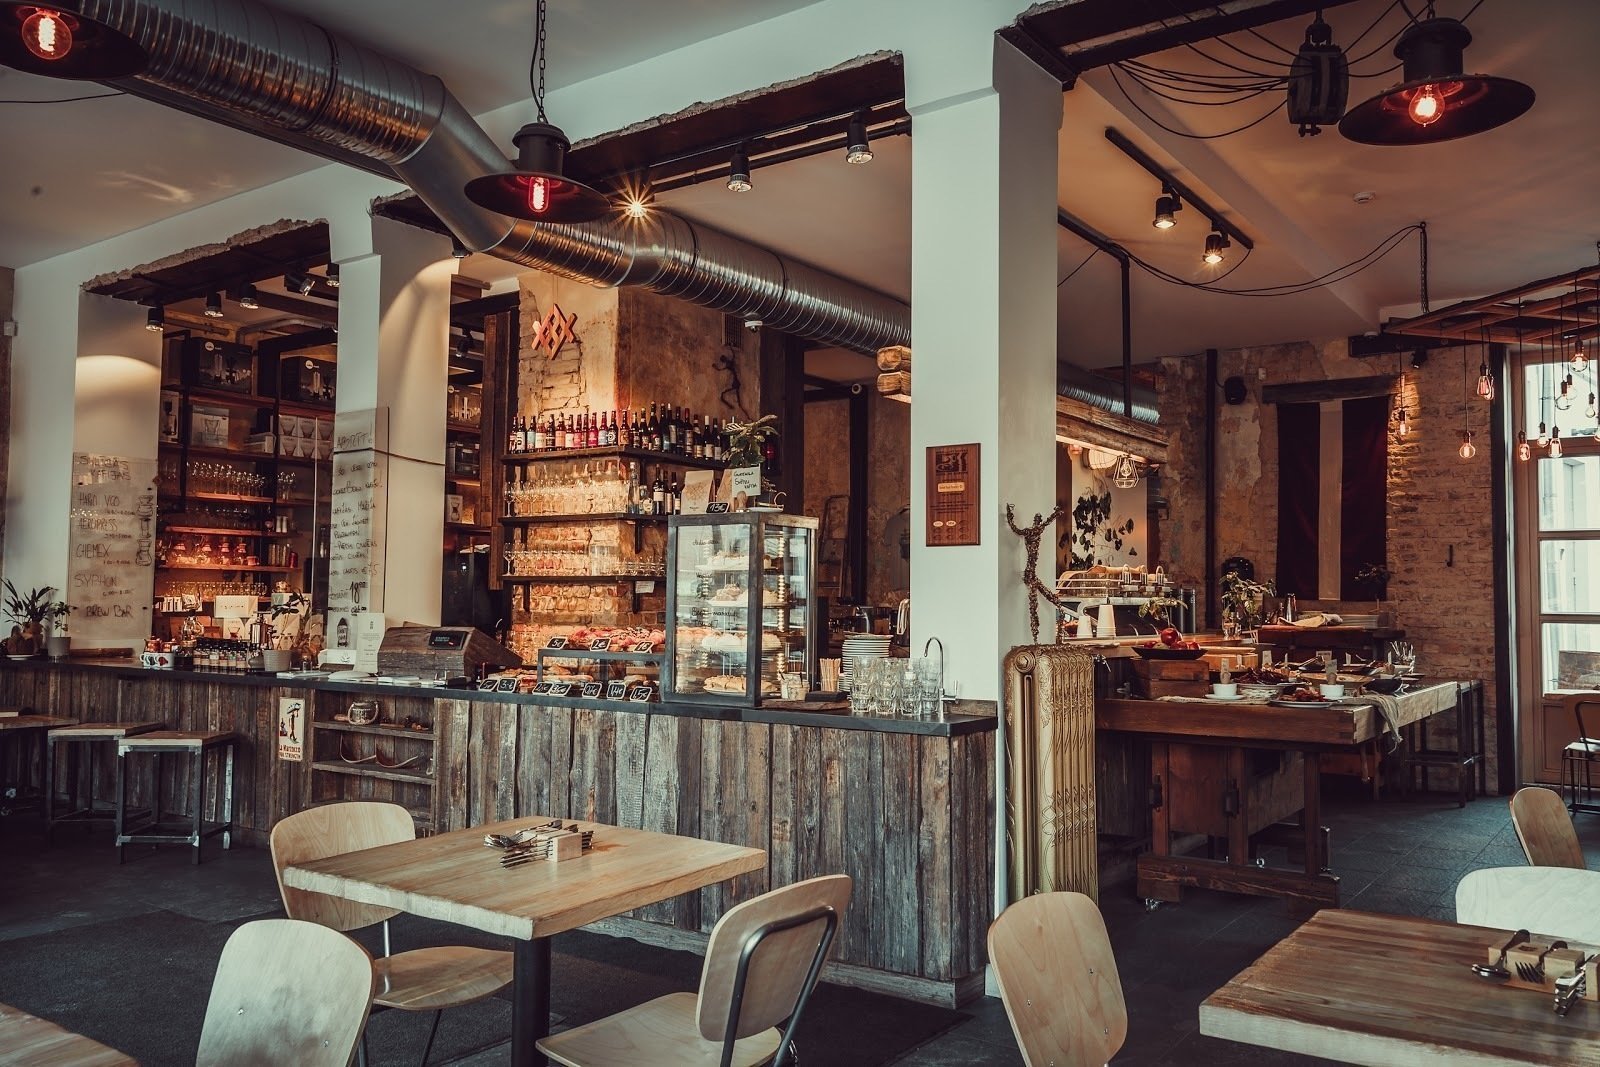 <span class="translation_missing" title="translation missing: en.meta.location_title, location_name: Rocket Bean Roastery, city: Riga">Location Title</span>